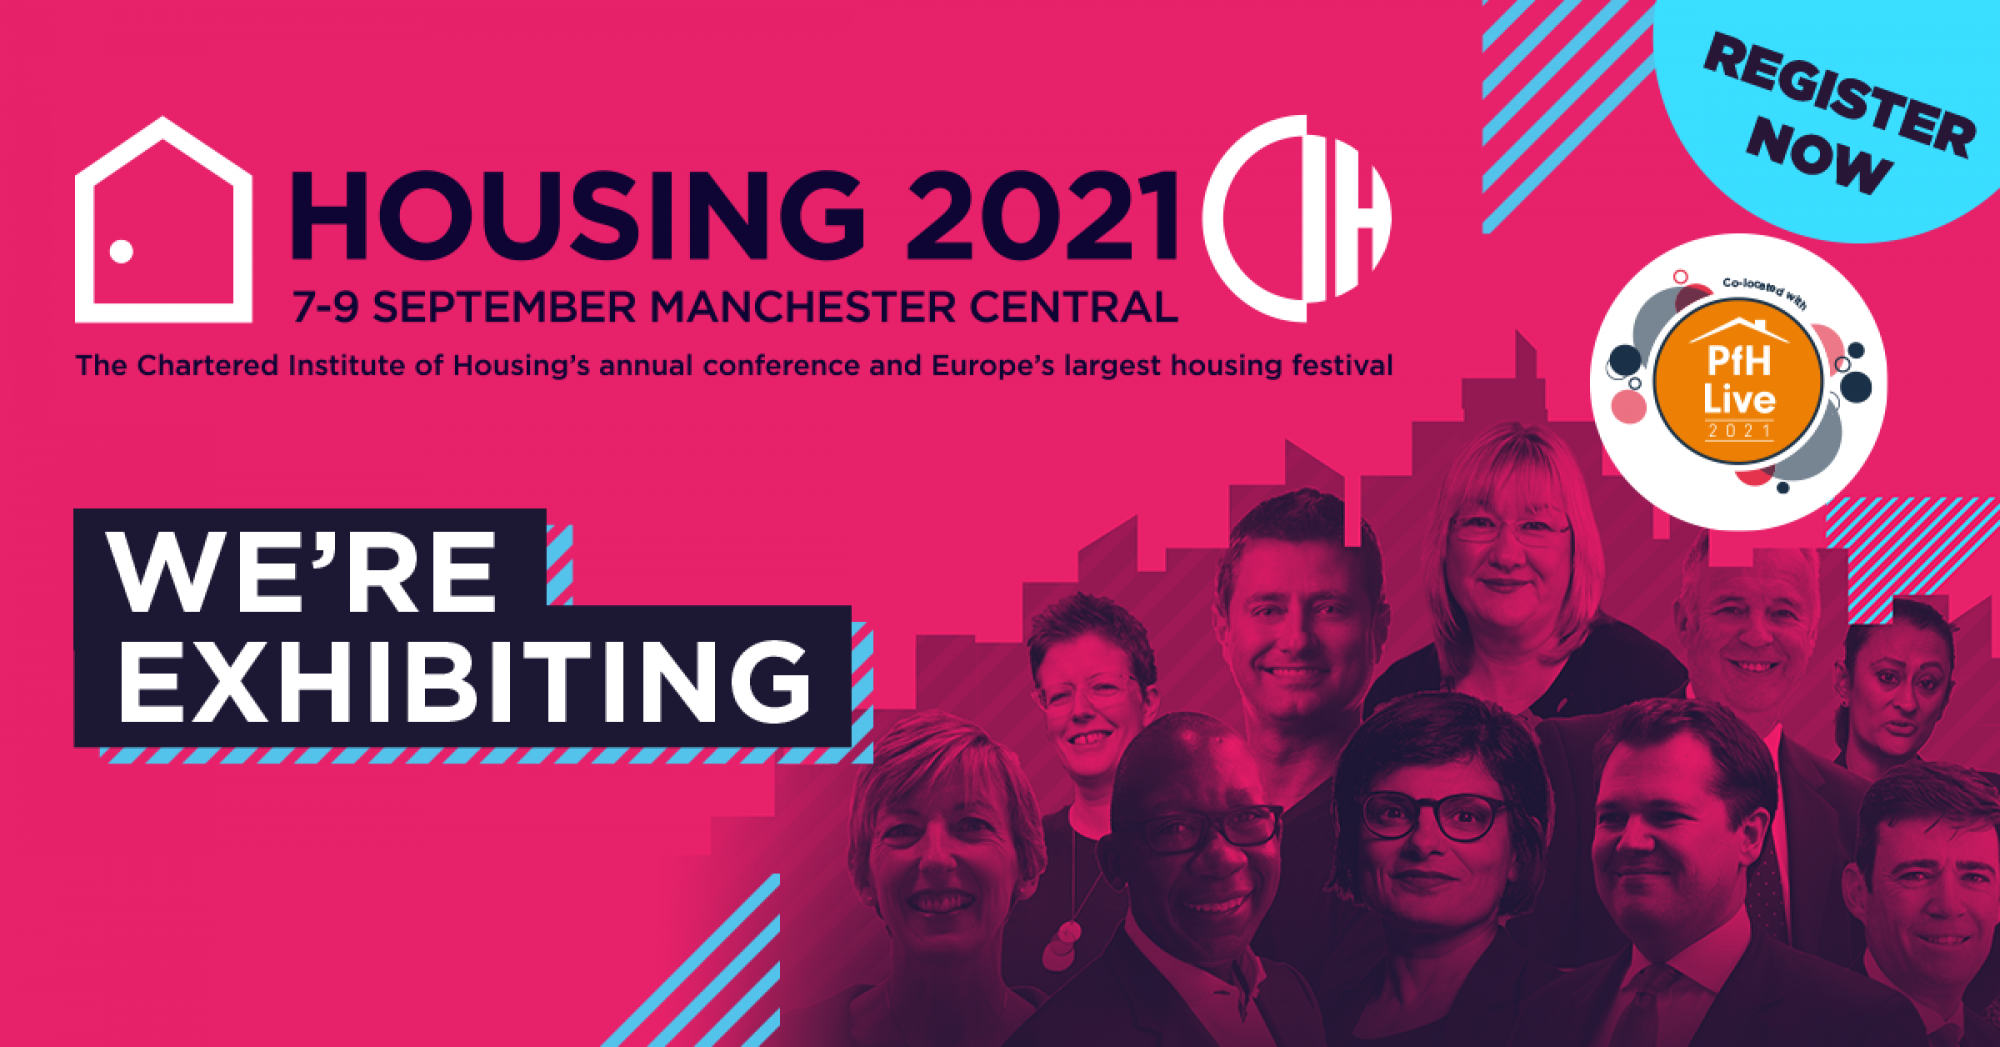 McAuliffe are exhibiting at this year’s CIH Housing conference